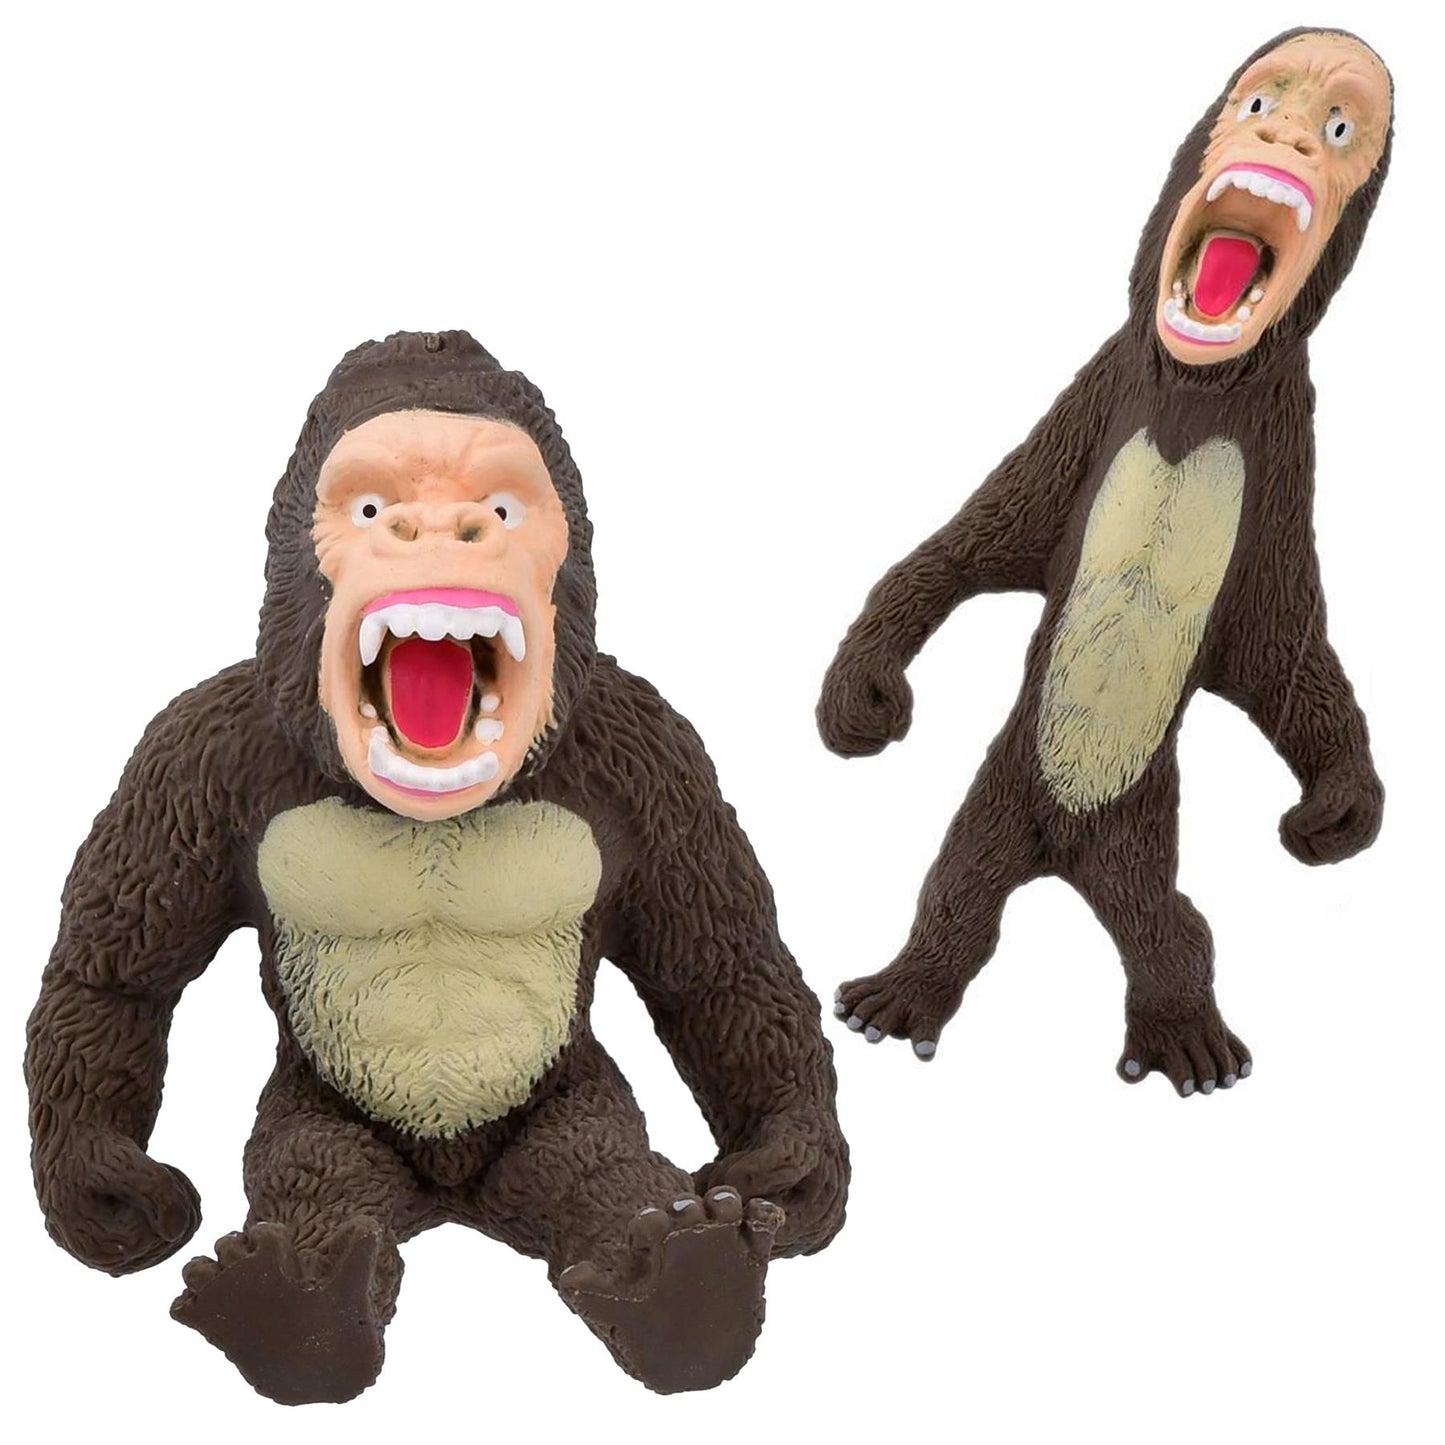 Stretchy Squeeze Gorilla Toy by The Magic Toy Shop - UKBuyZone